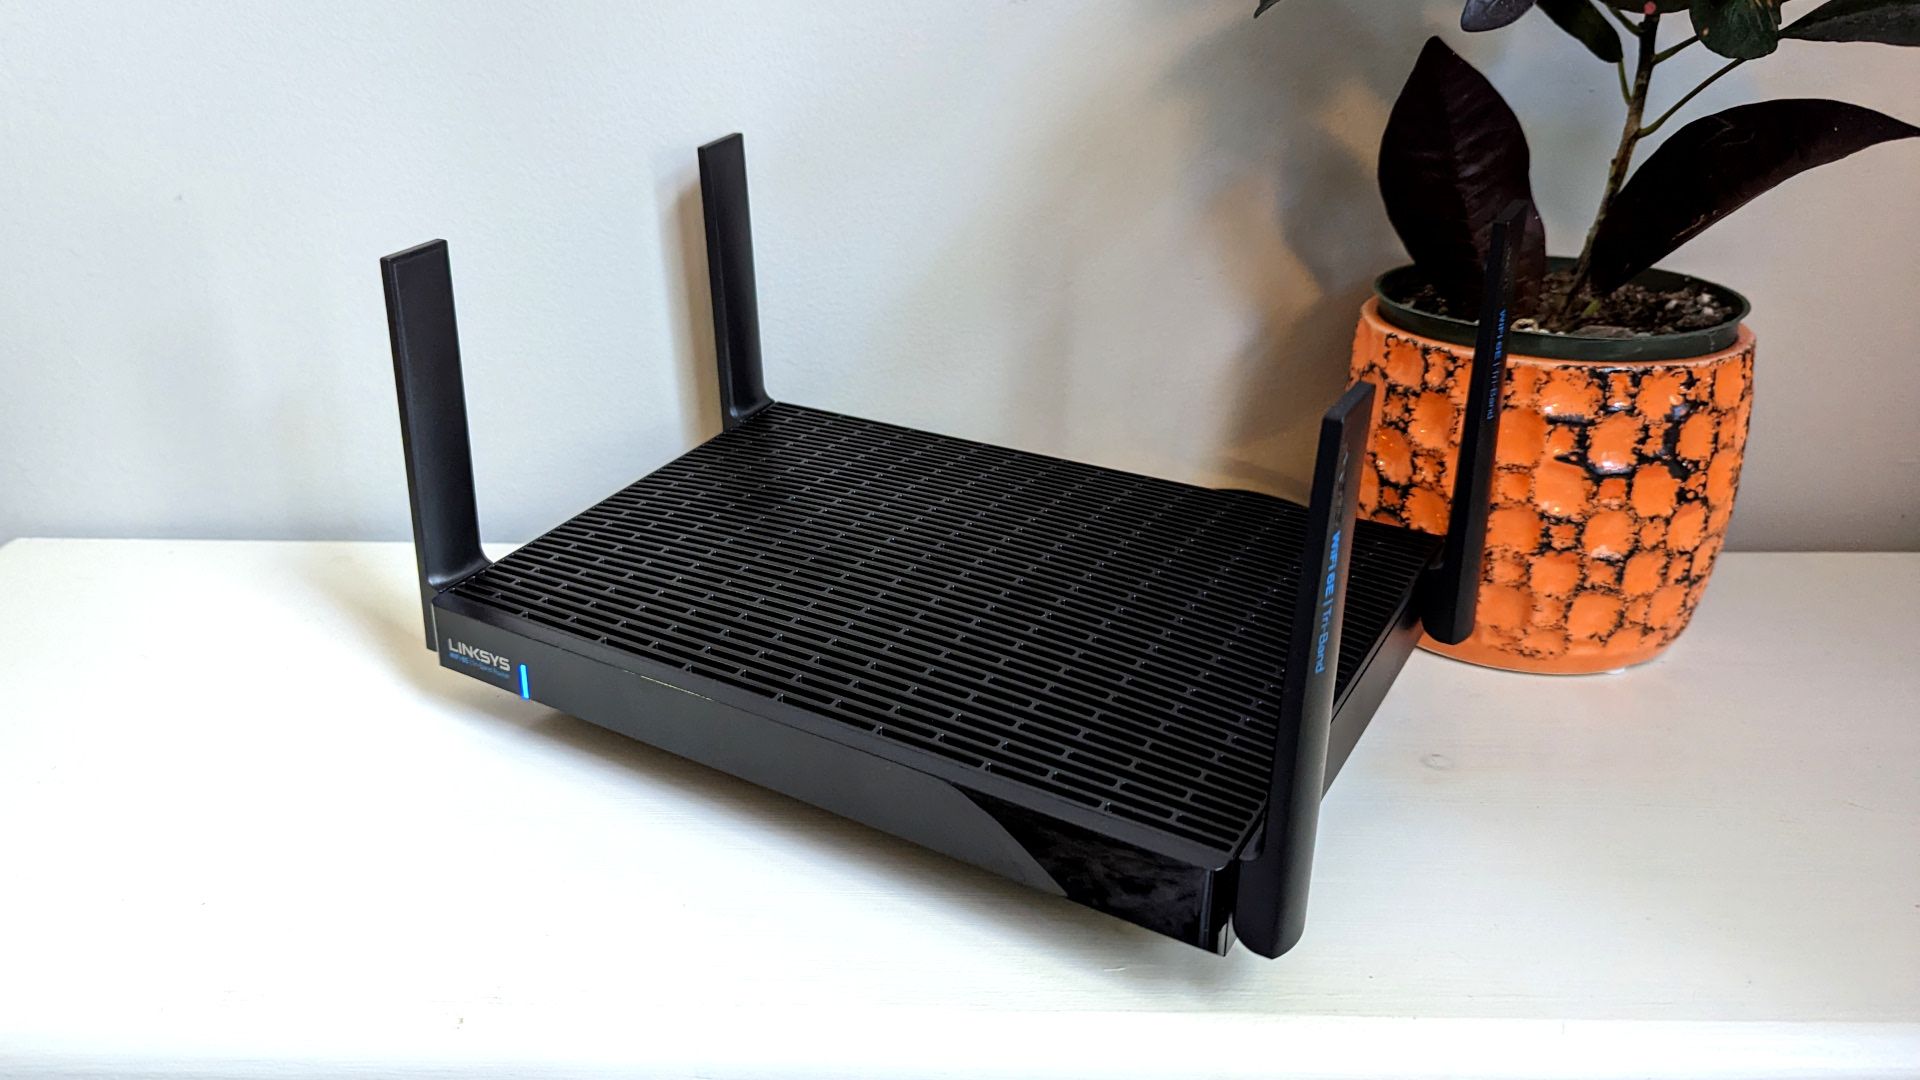 The Linksys Hydra Pro 6E router next to a potted plant.